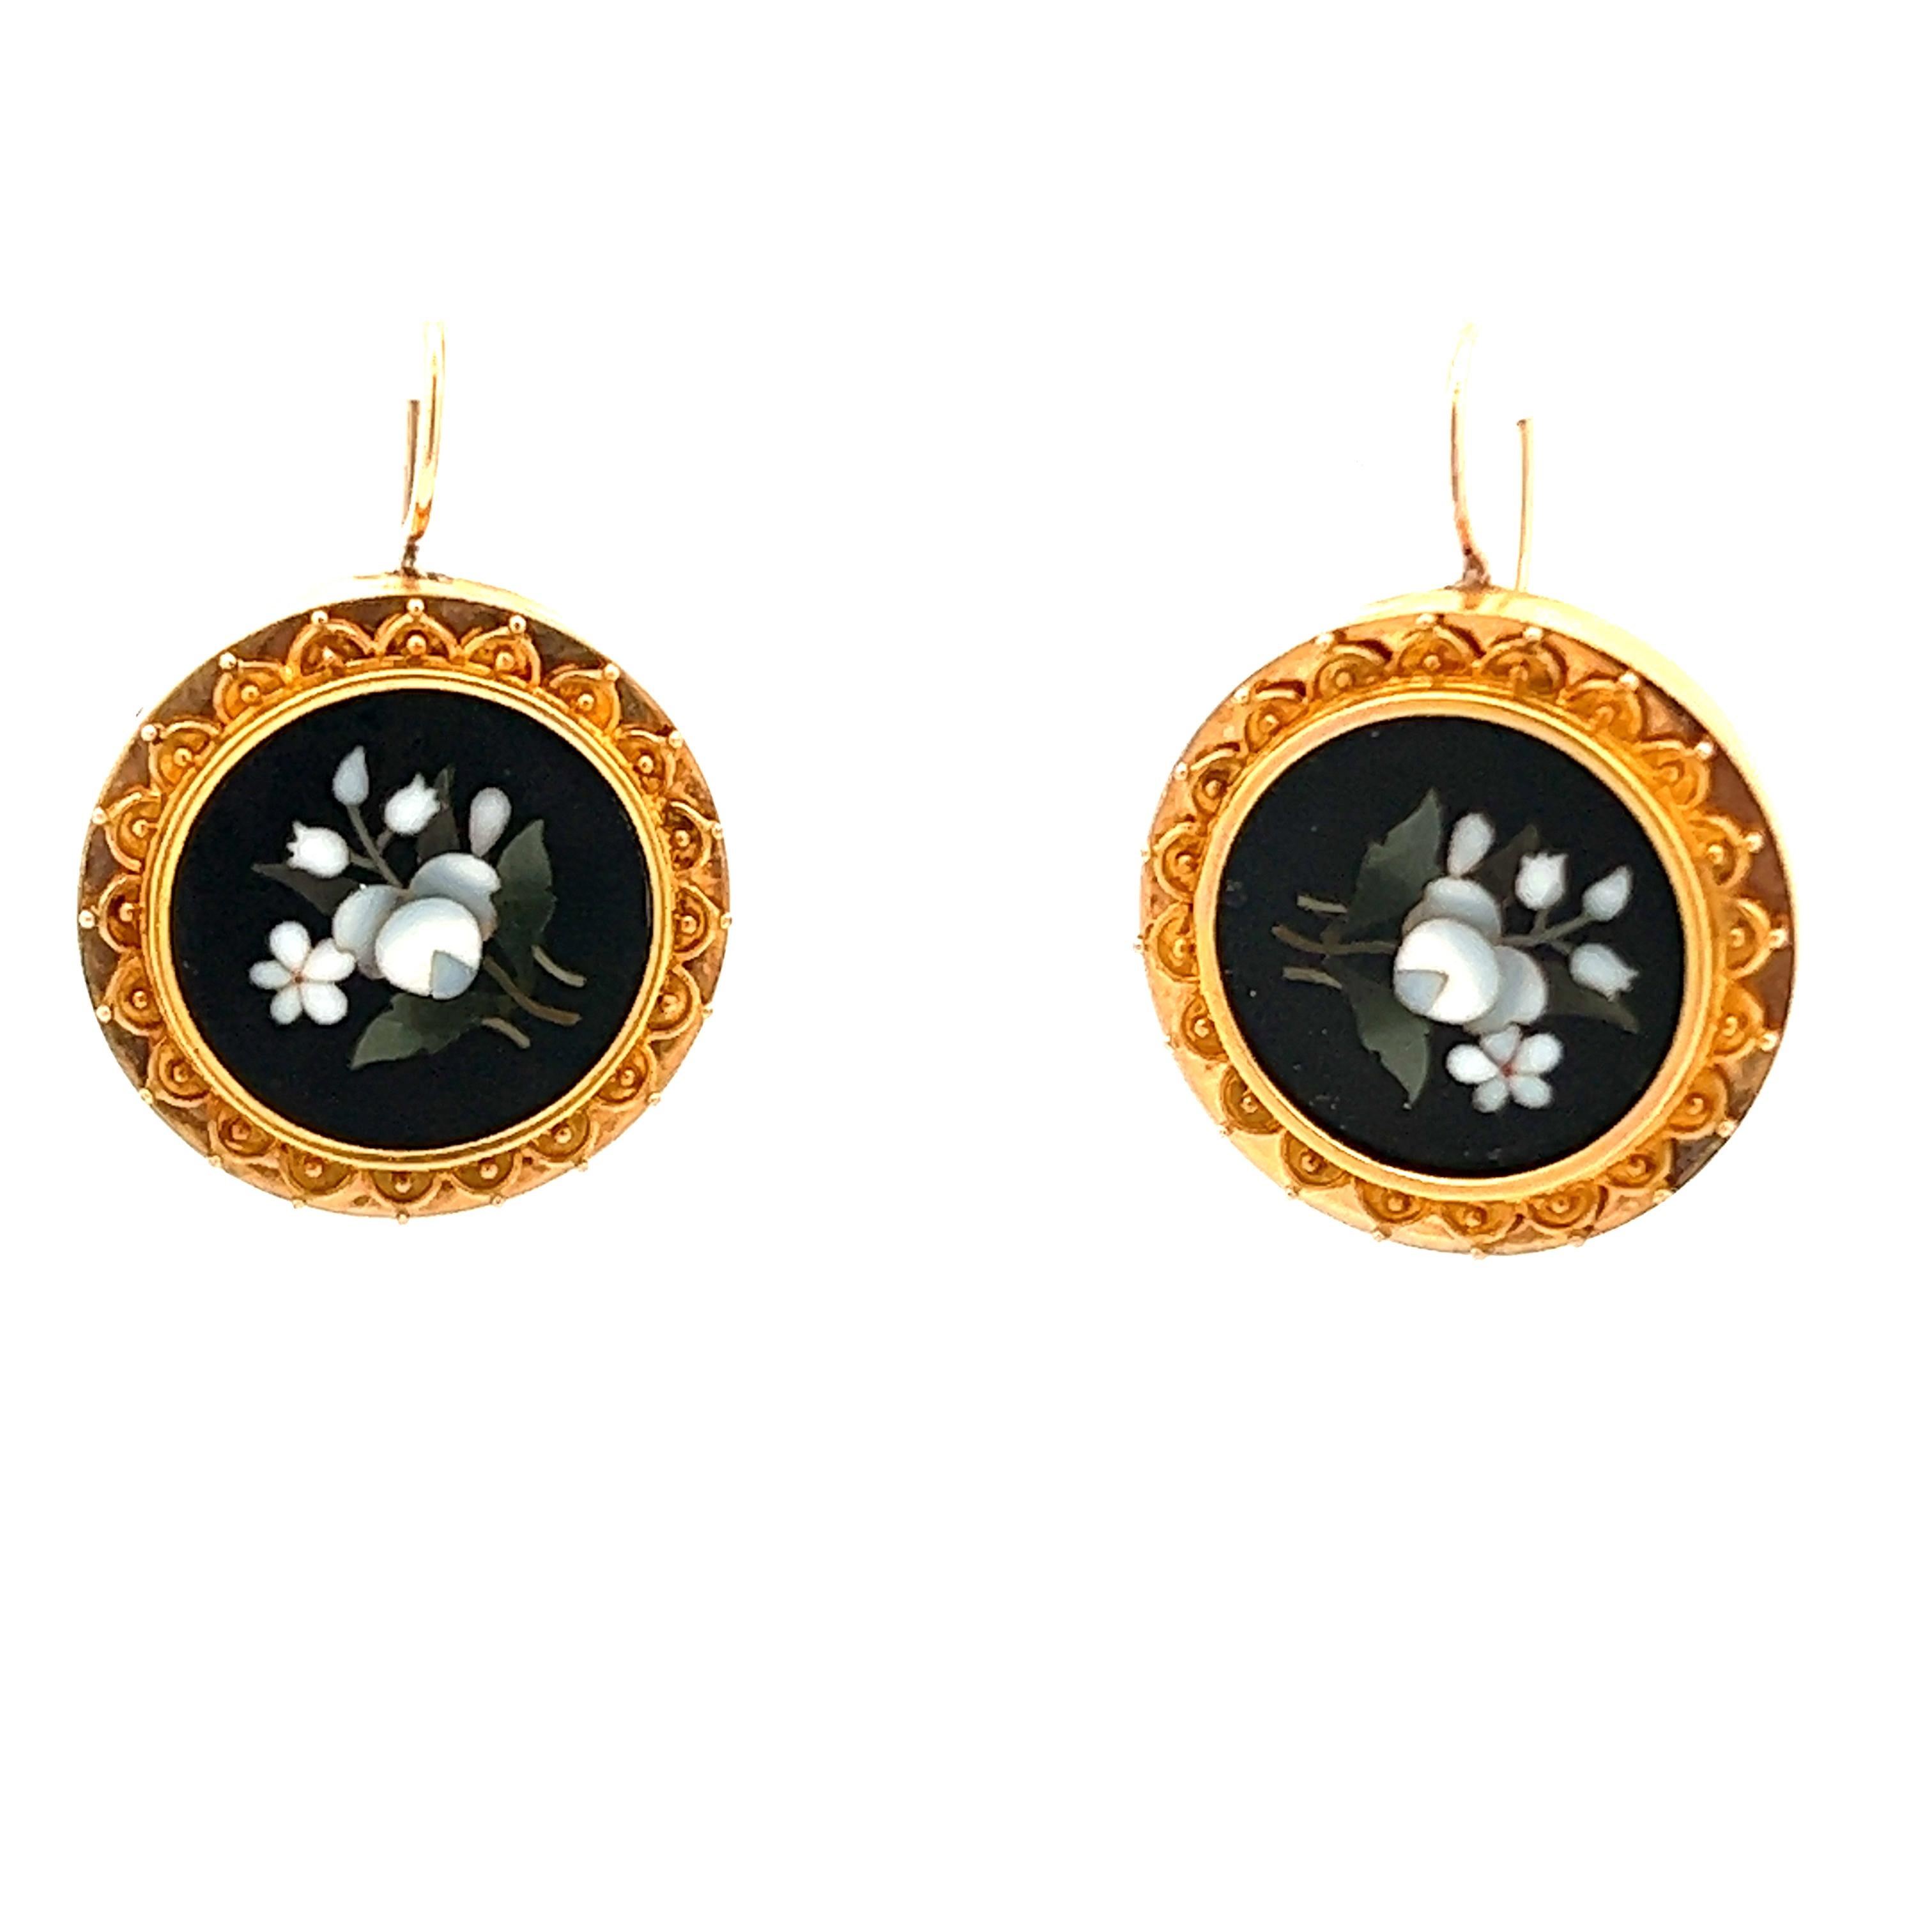 This beautiful pair of Pietra Dura Etruscan earrings from 1880 are made in 18k yellow gold with shepherd hooks. These earrings are quite unique due to their time period and materials. Being made in 18k yellow gold, these earrings contain a higher